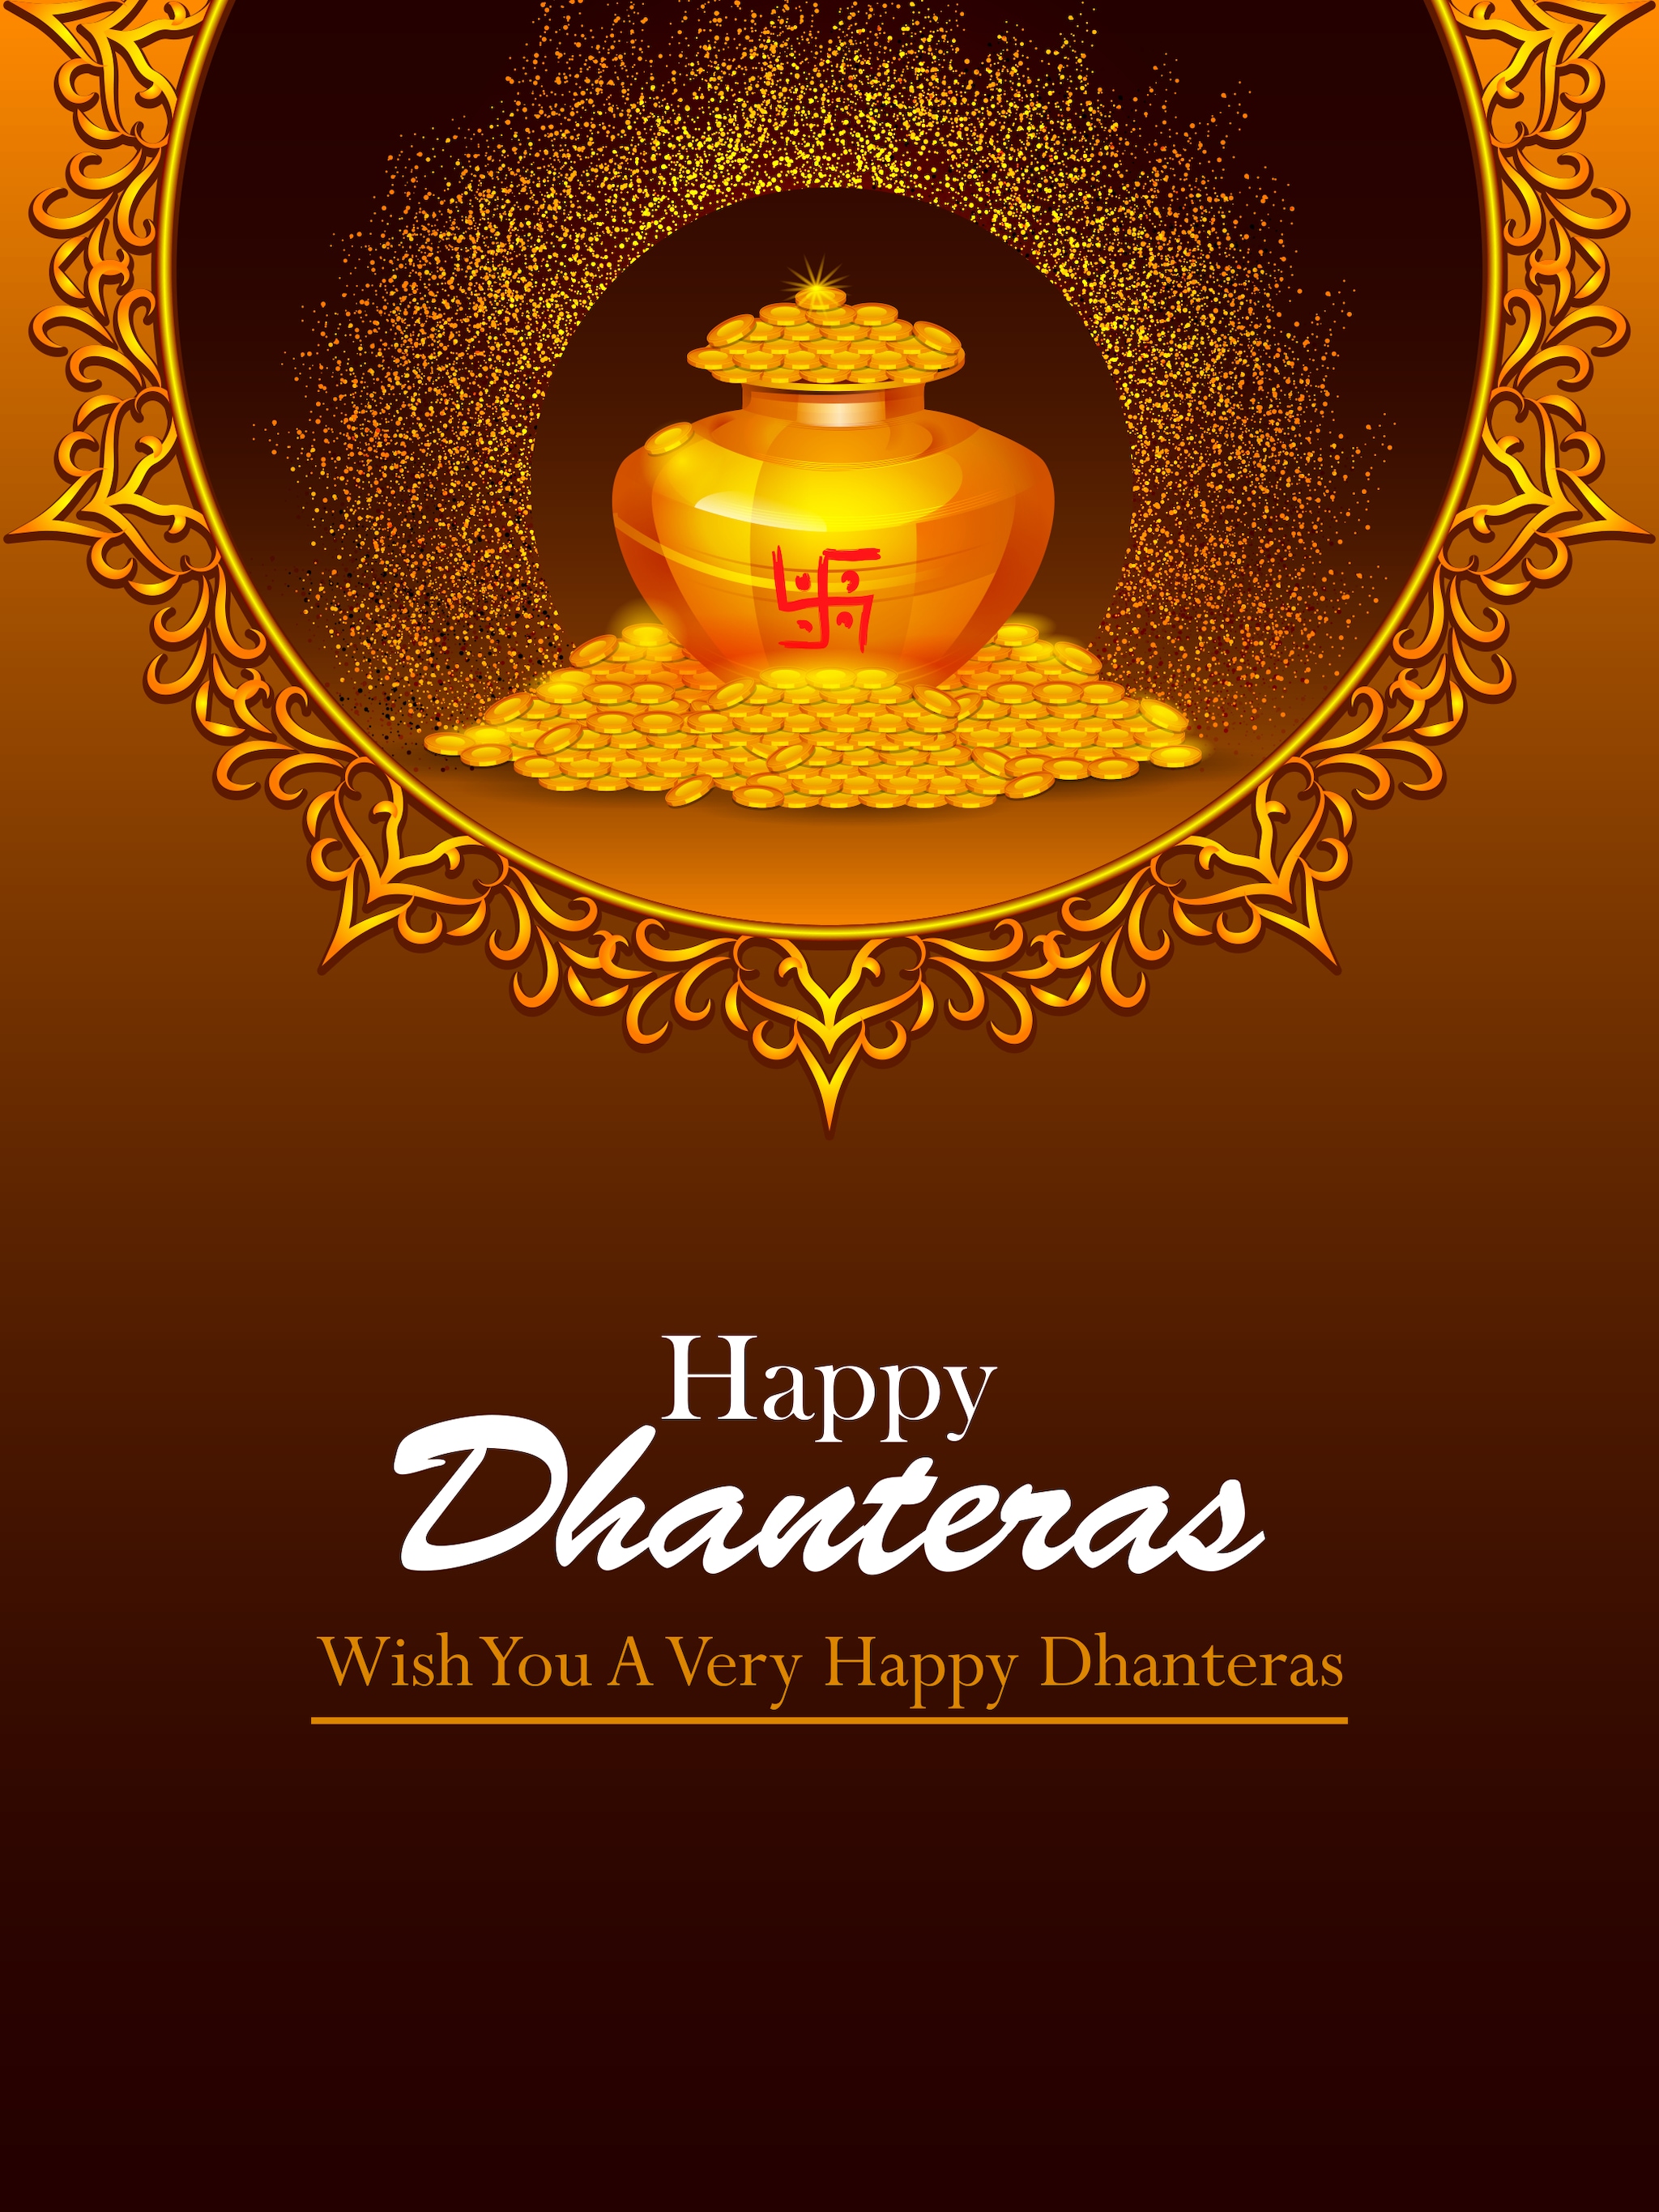 Happy Dhanteras 2022: Best Wishes, messages, quotes, greetings, SMS, WhatsApp and Facebook status to share with your family and friends. (Image: Shutterstock) 